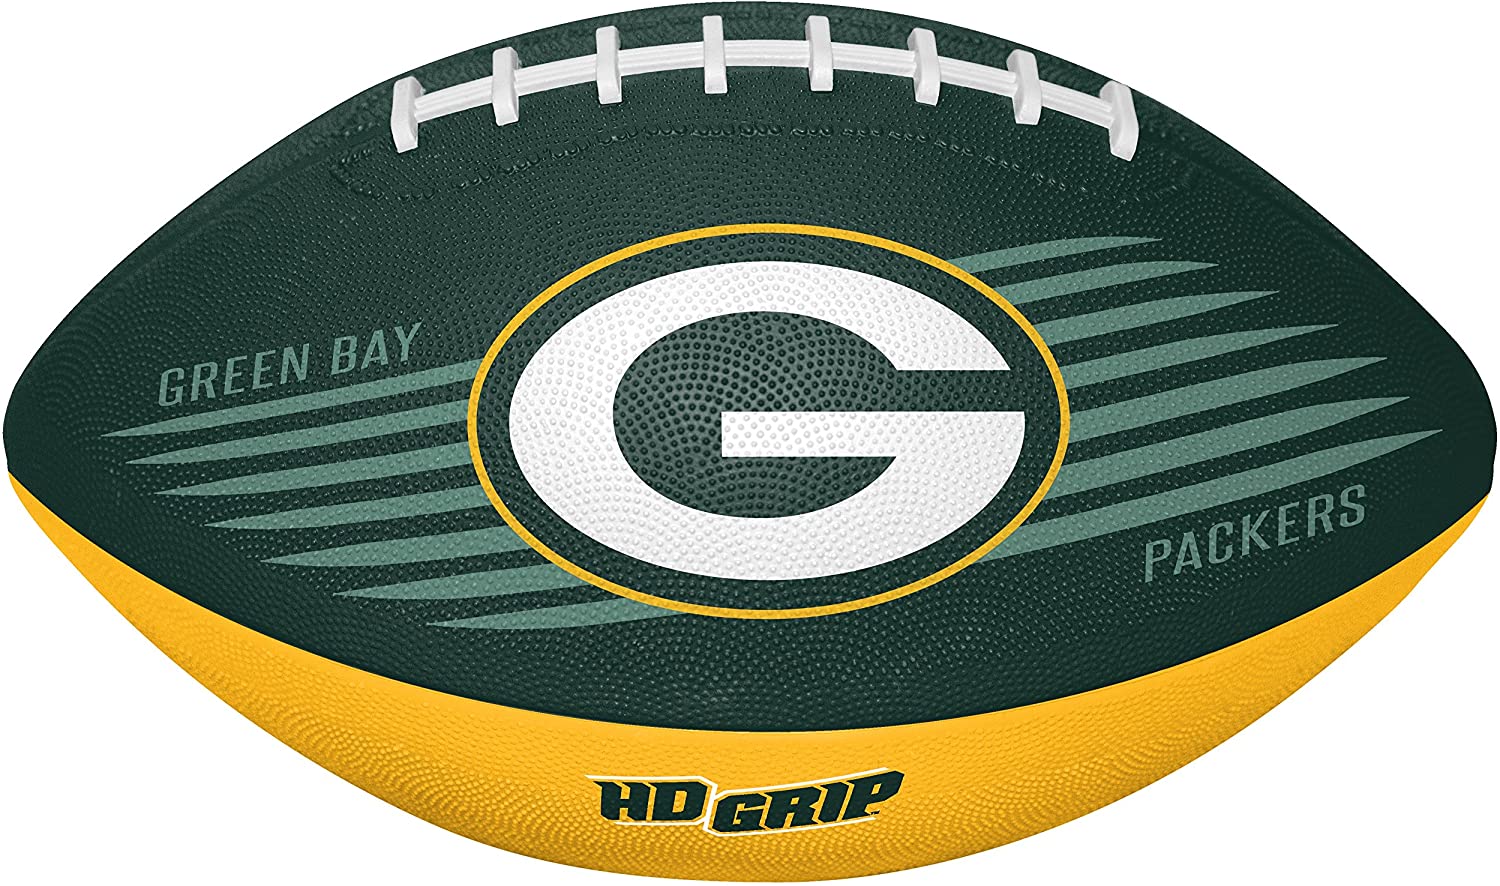 Rawlings Green Bay Packers NFL Youth Size Football